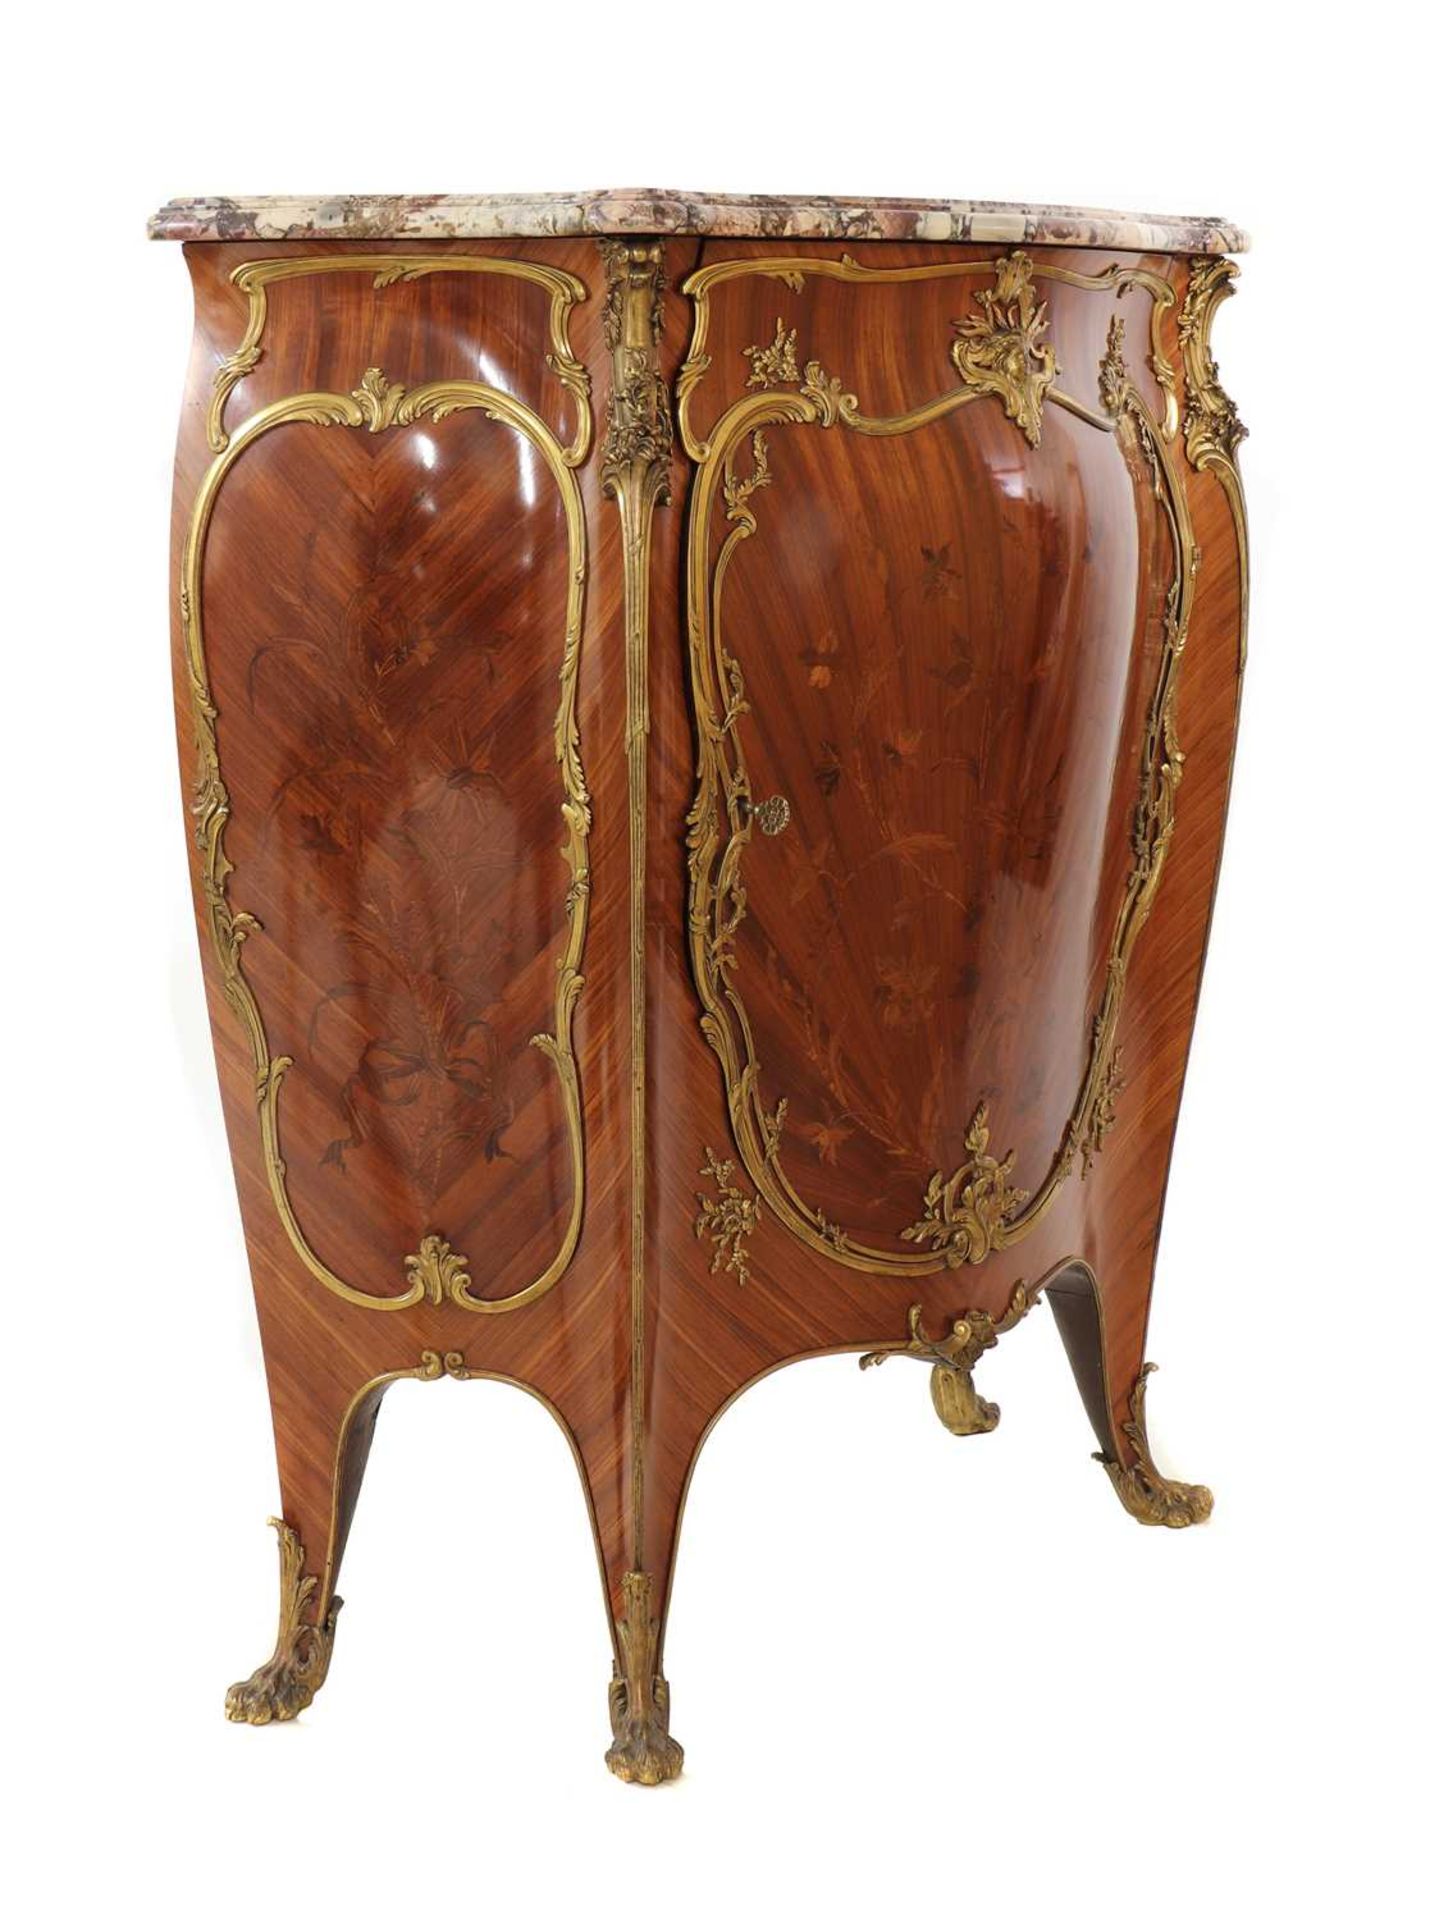 A French Louis XV-style amaranth and kingwood meuble d'appui, - Image 4 of 80